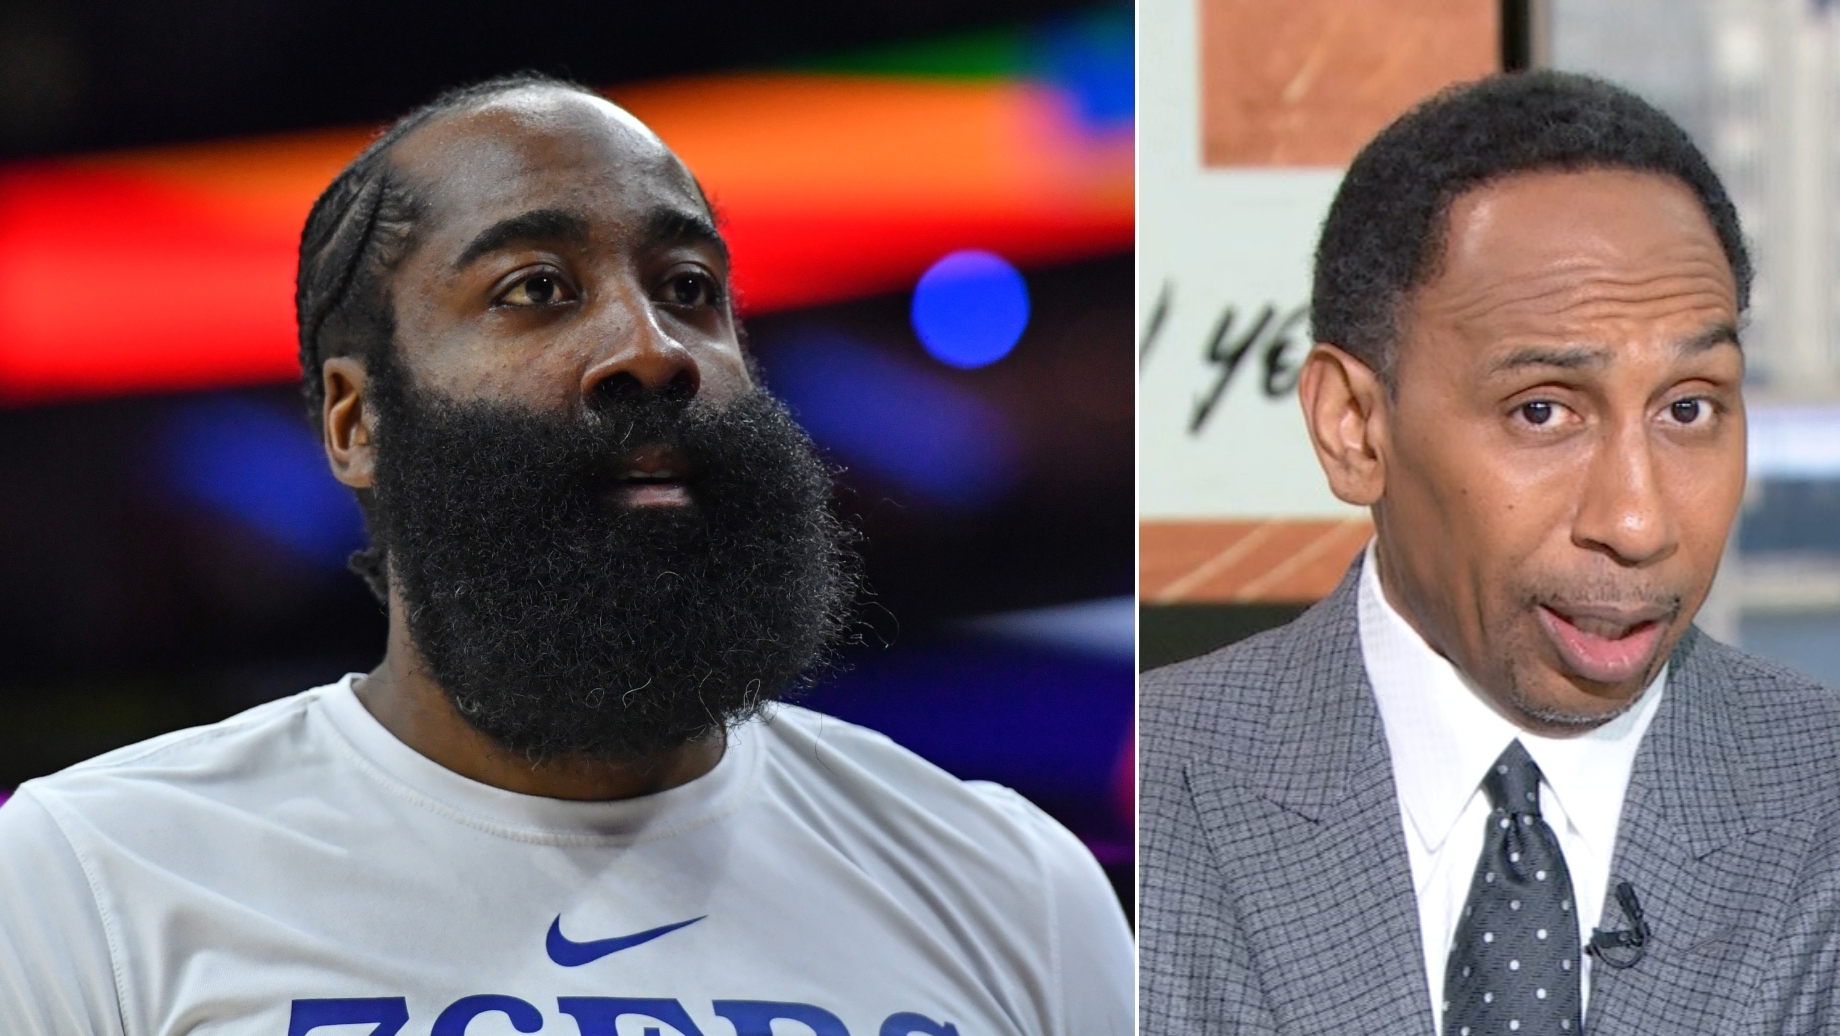 Stephen A. calls out James Harden for being a 'petulant child'